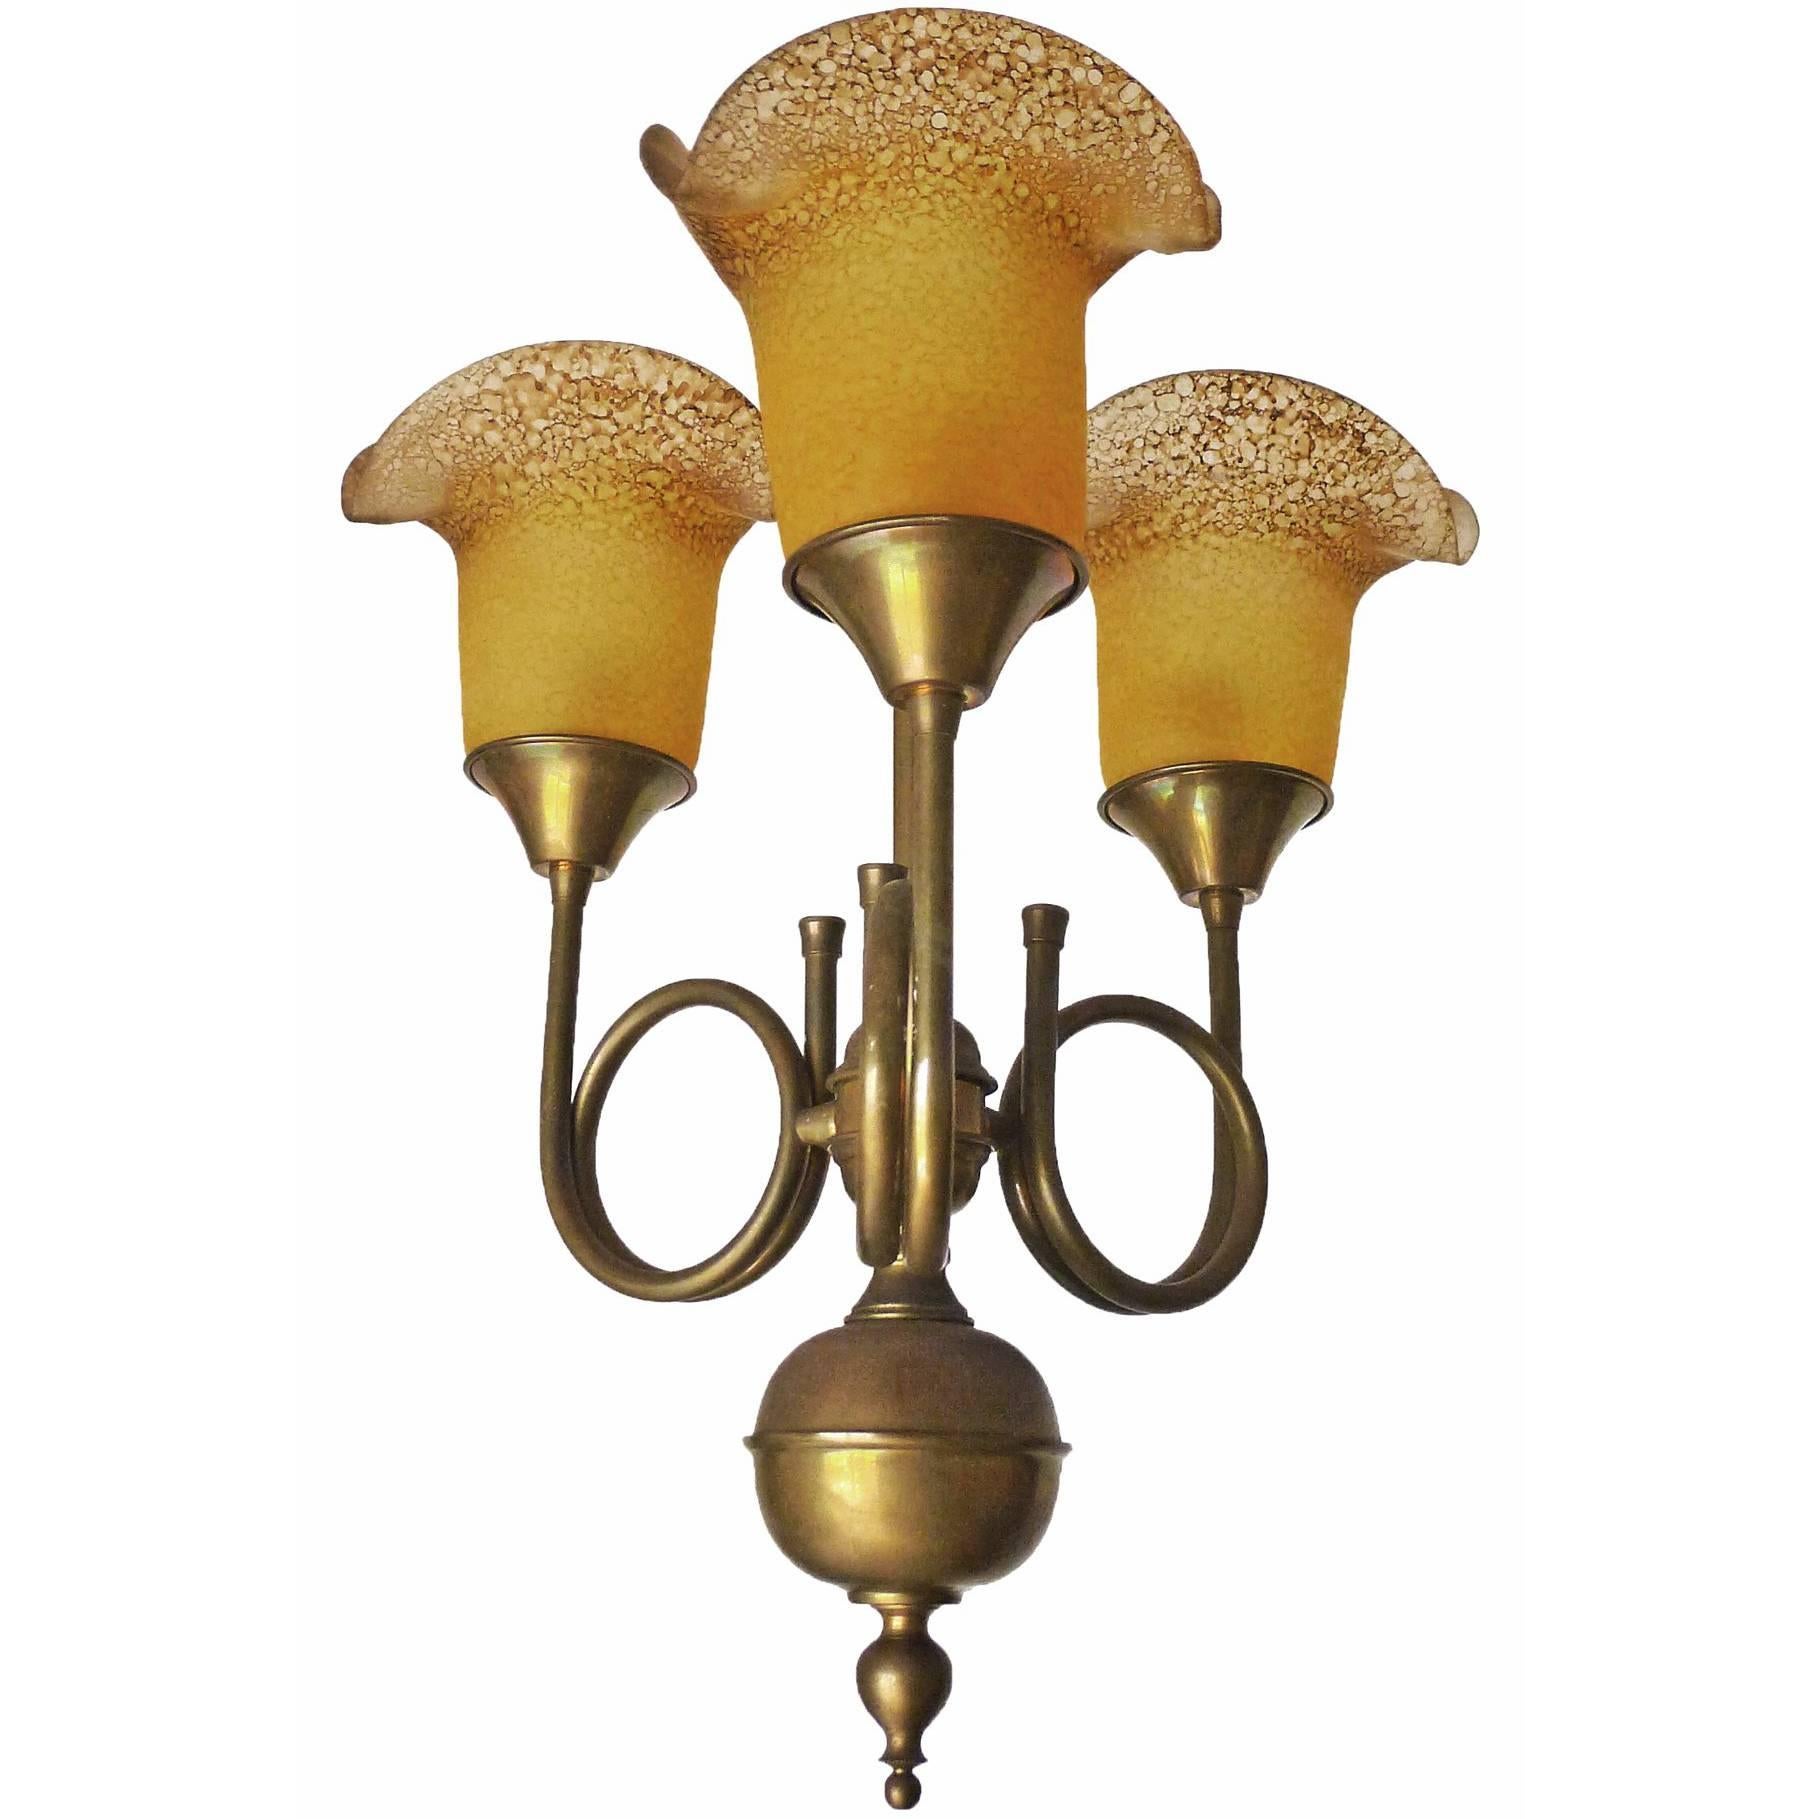 Vintage Art Deco or Art Nouveau colorful hand blown Amber art glass shades 'Hunting Horn' pâte de verre chandelier
Measures:
Diameter 16 in / 40 cm
Height 28 in/ 70 cm
Weight 6 lb. (3 kg)
Three-light bulbs E14 /60 with good working